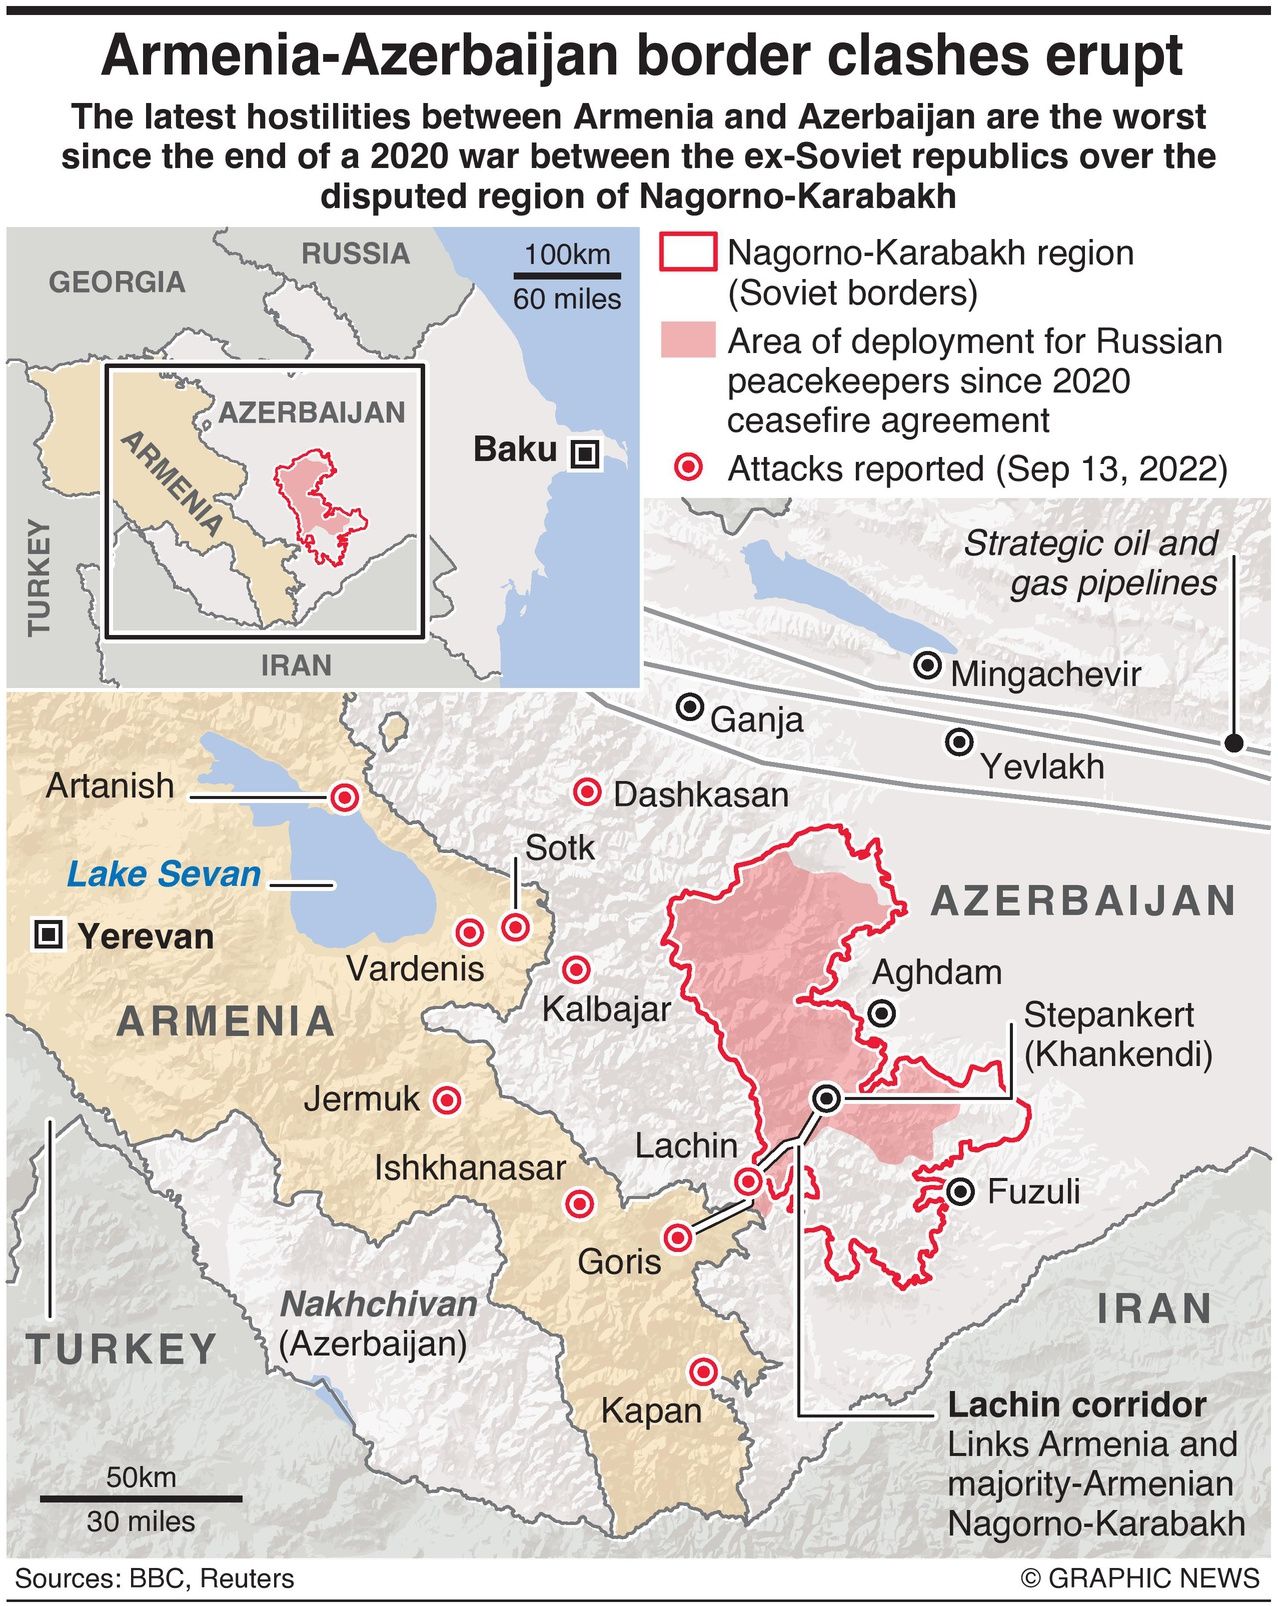 Infographic depicting the most recent clashes between Armenia and Azerbaijan